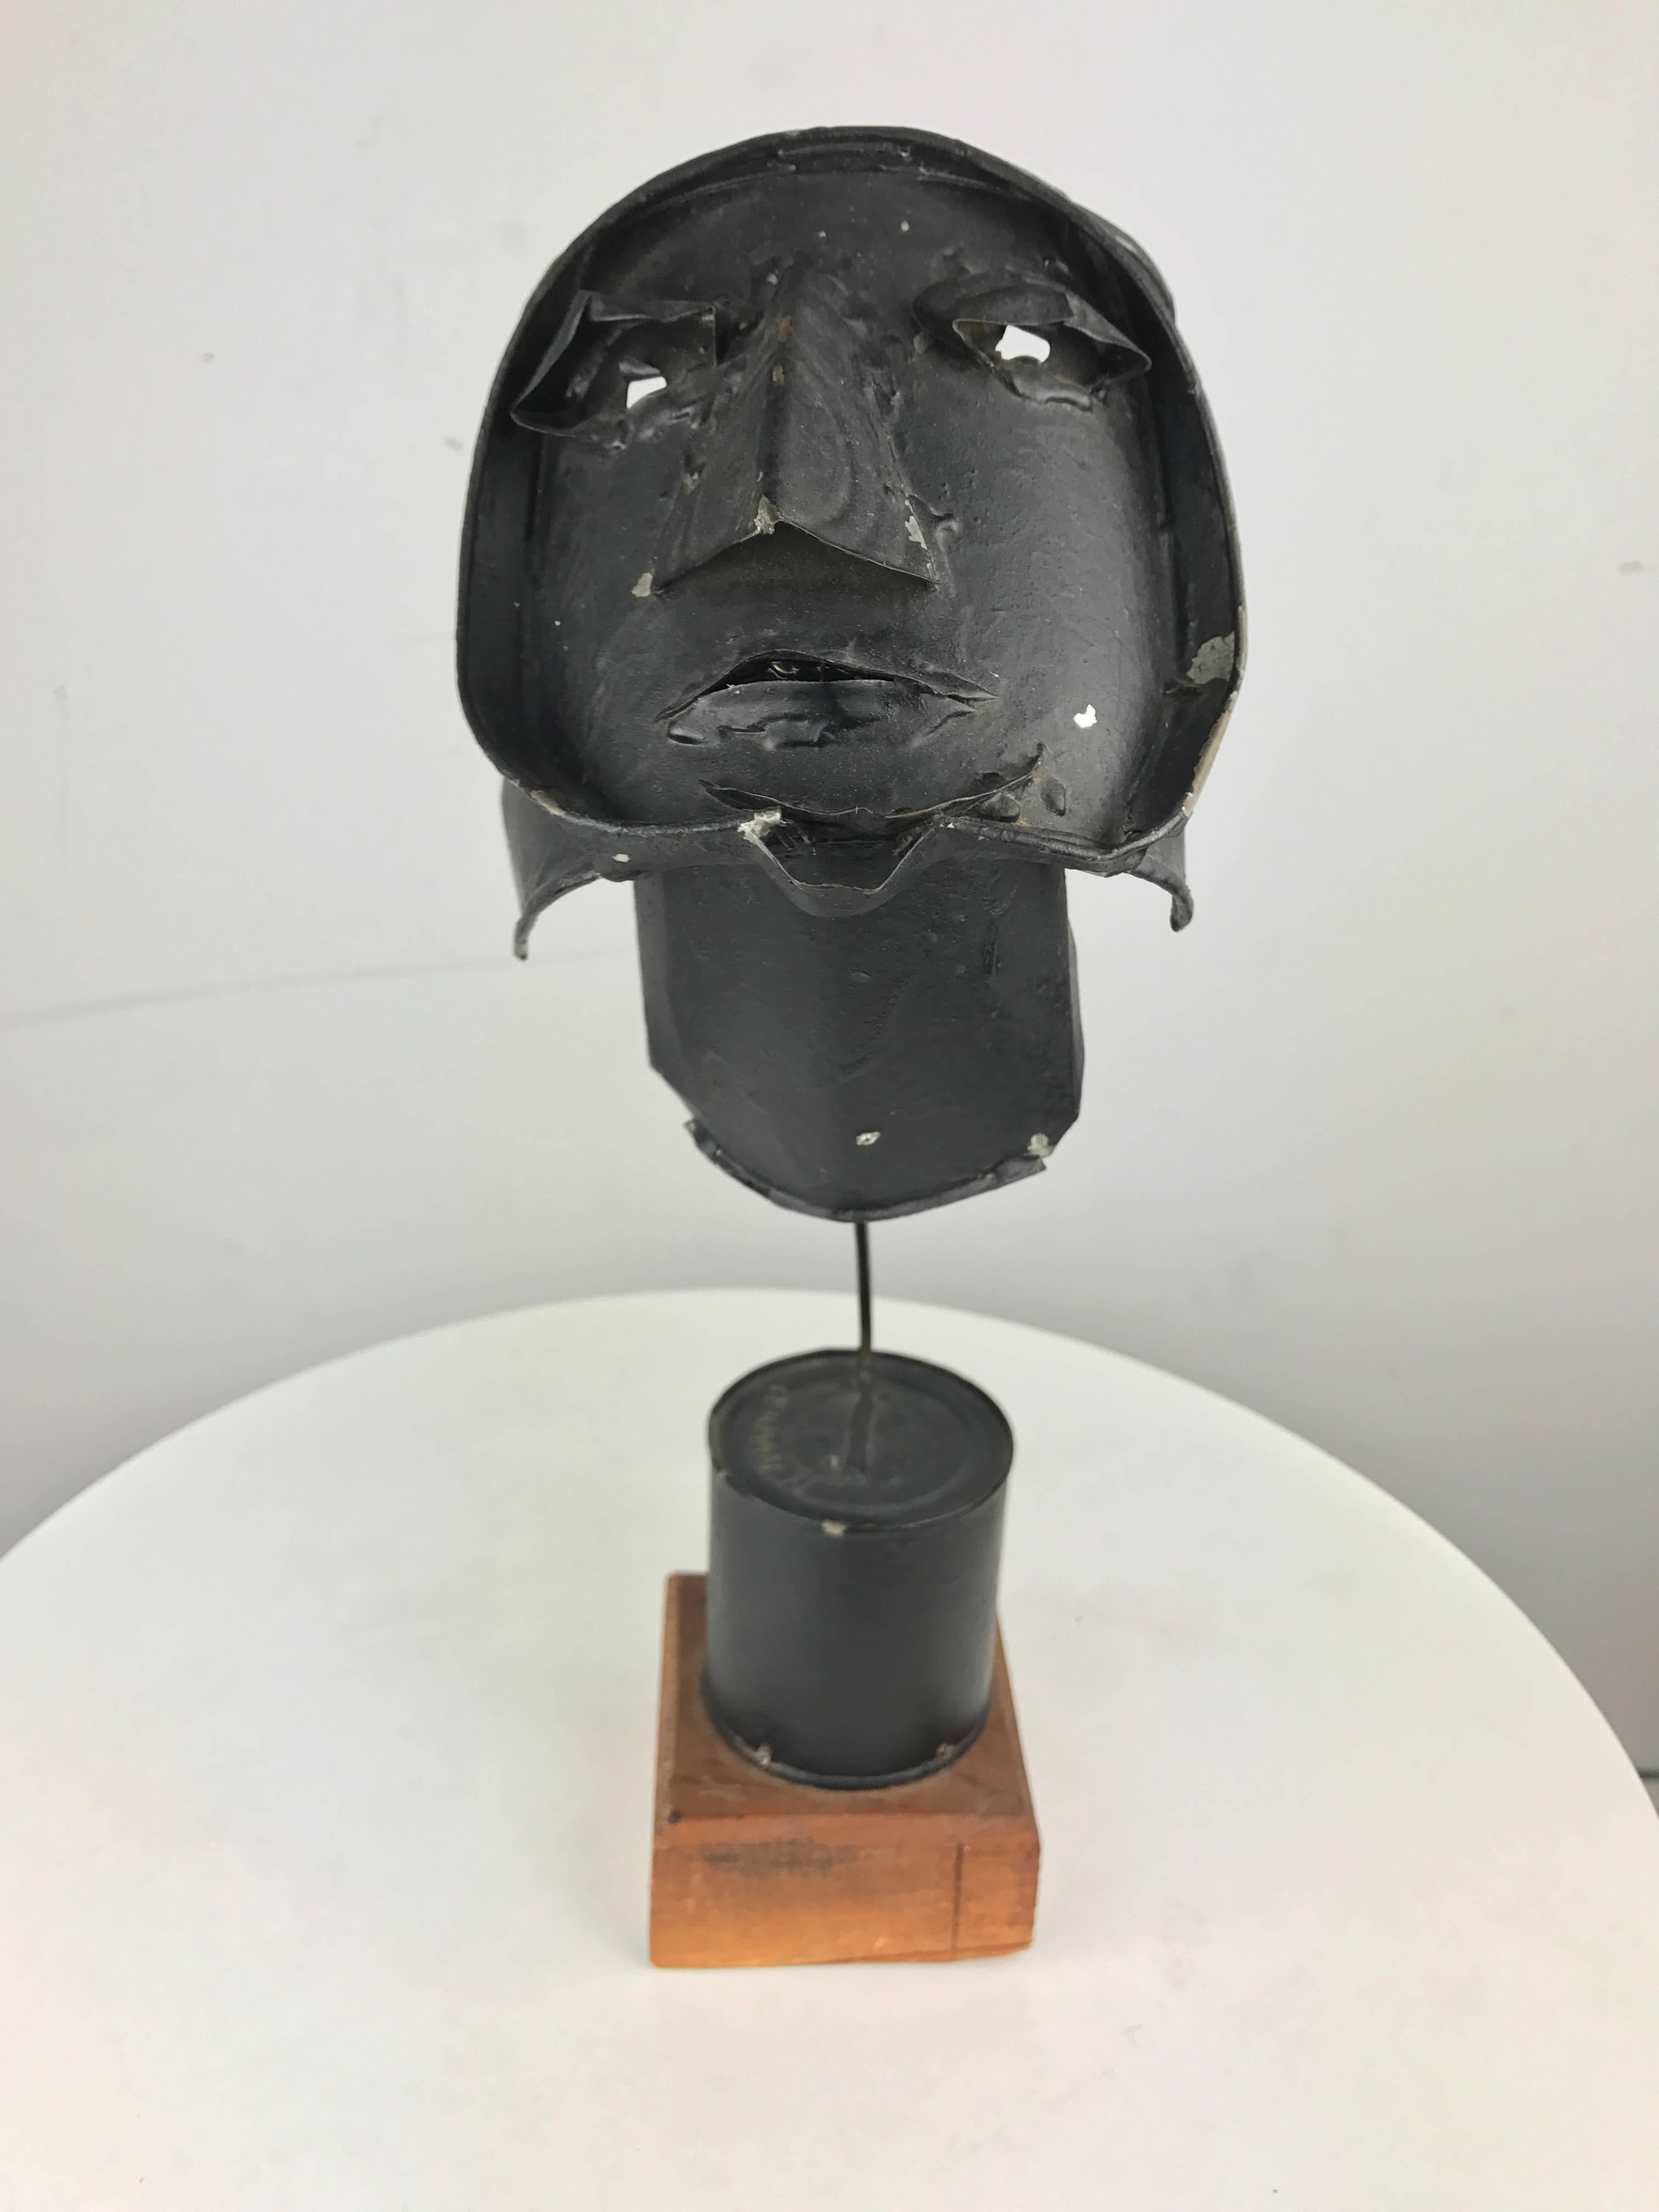 Post Modern Metal Sculpture by Irving George Lehman ,Welded metal and paint depicting mans head, 
Irving Lehman.
Born in Kiev, Irving Lehman studied at the Art Students League and Cooper Union in New York City, eventually becoming a Member of the